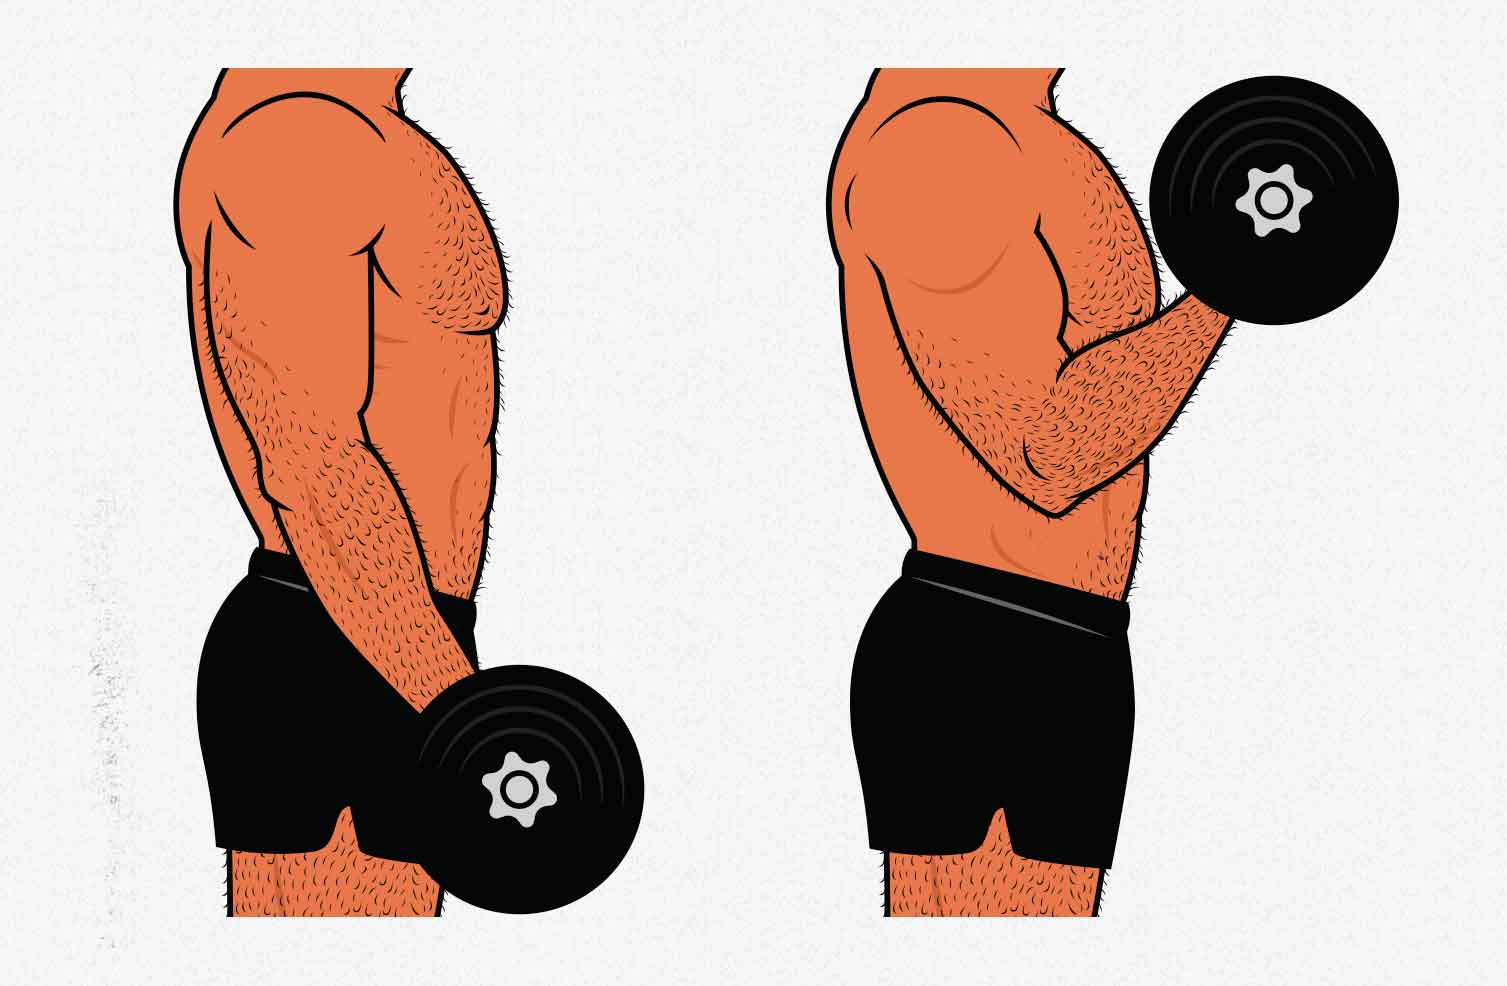 Illustration showing how to do dumbbell biceps curls.